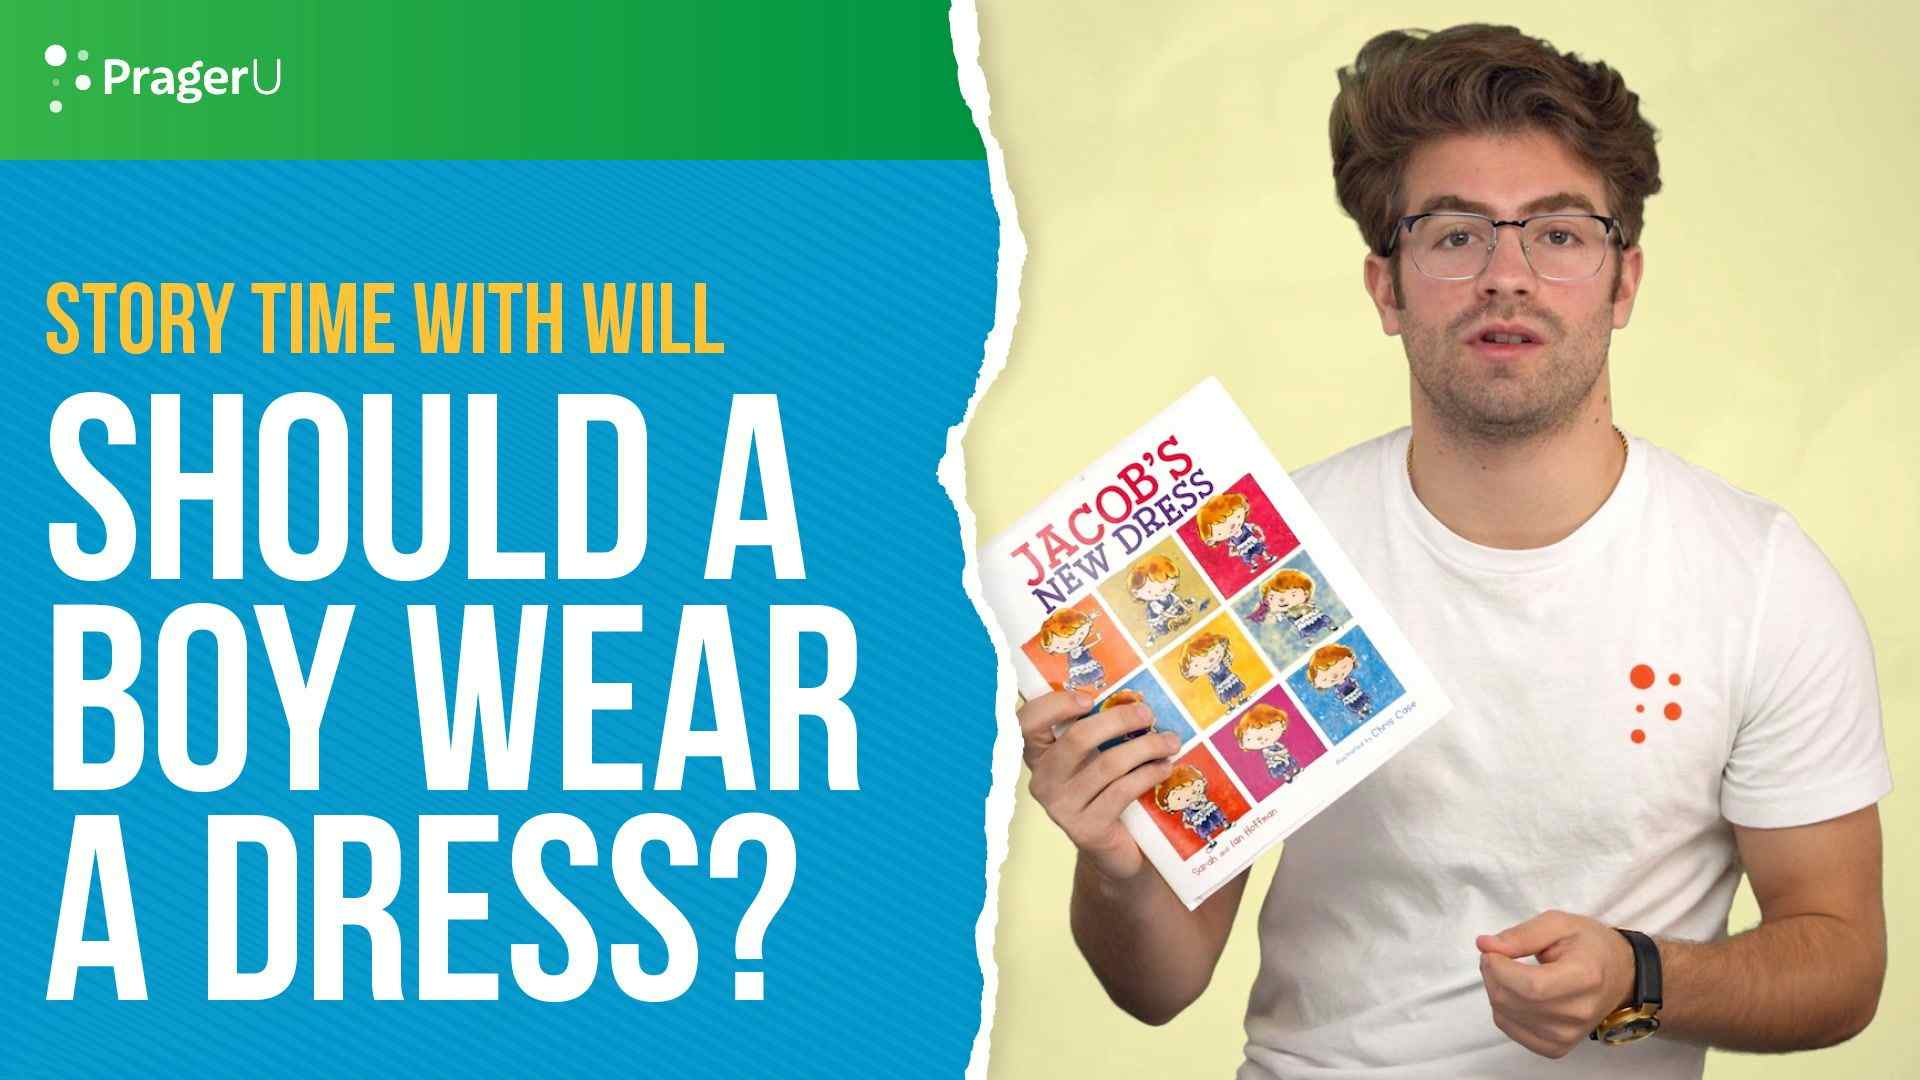 Story Time With Will: Should a Boy Wear a Dress?